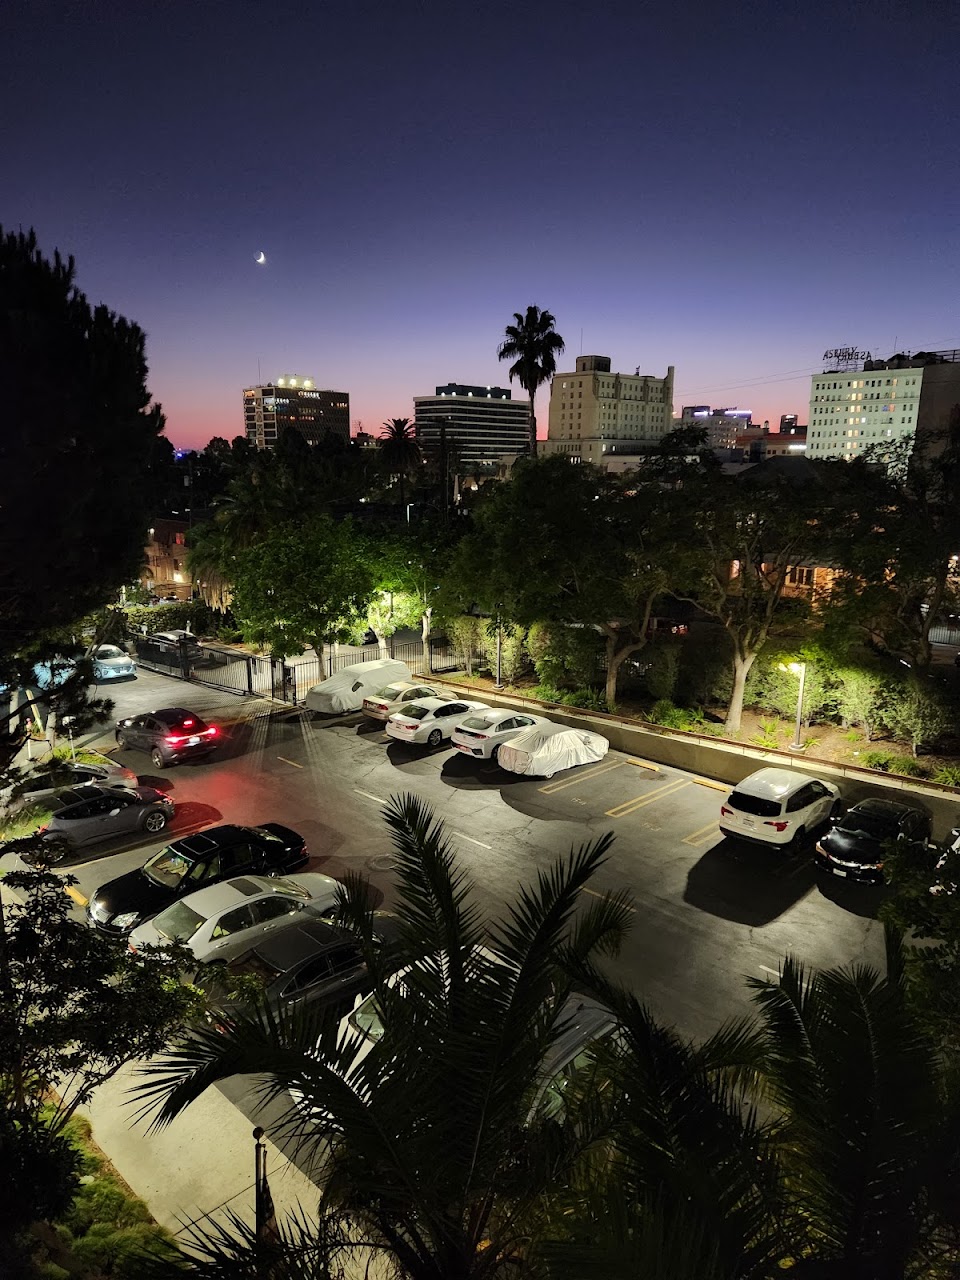 Photo of MACARTHUR PARK TOWERS at 450 S GRAND VIEW ST LOS ANGELES, CA 90057